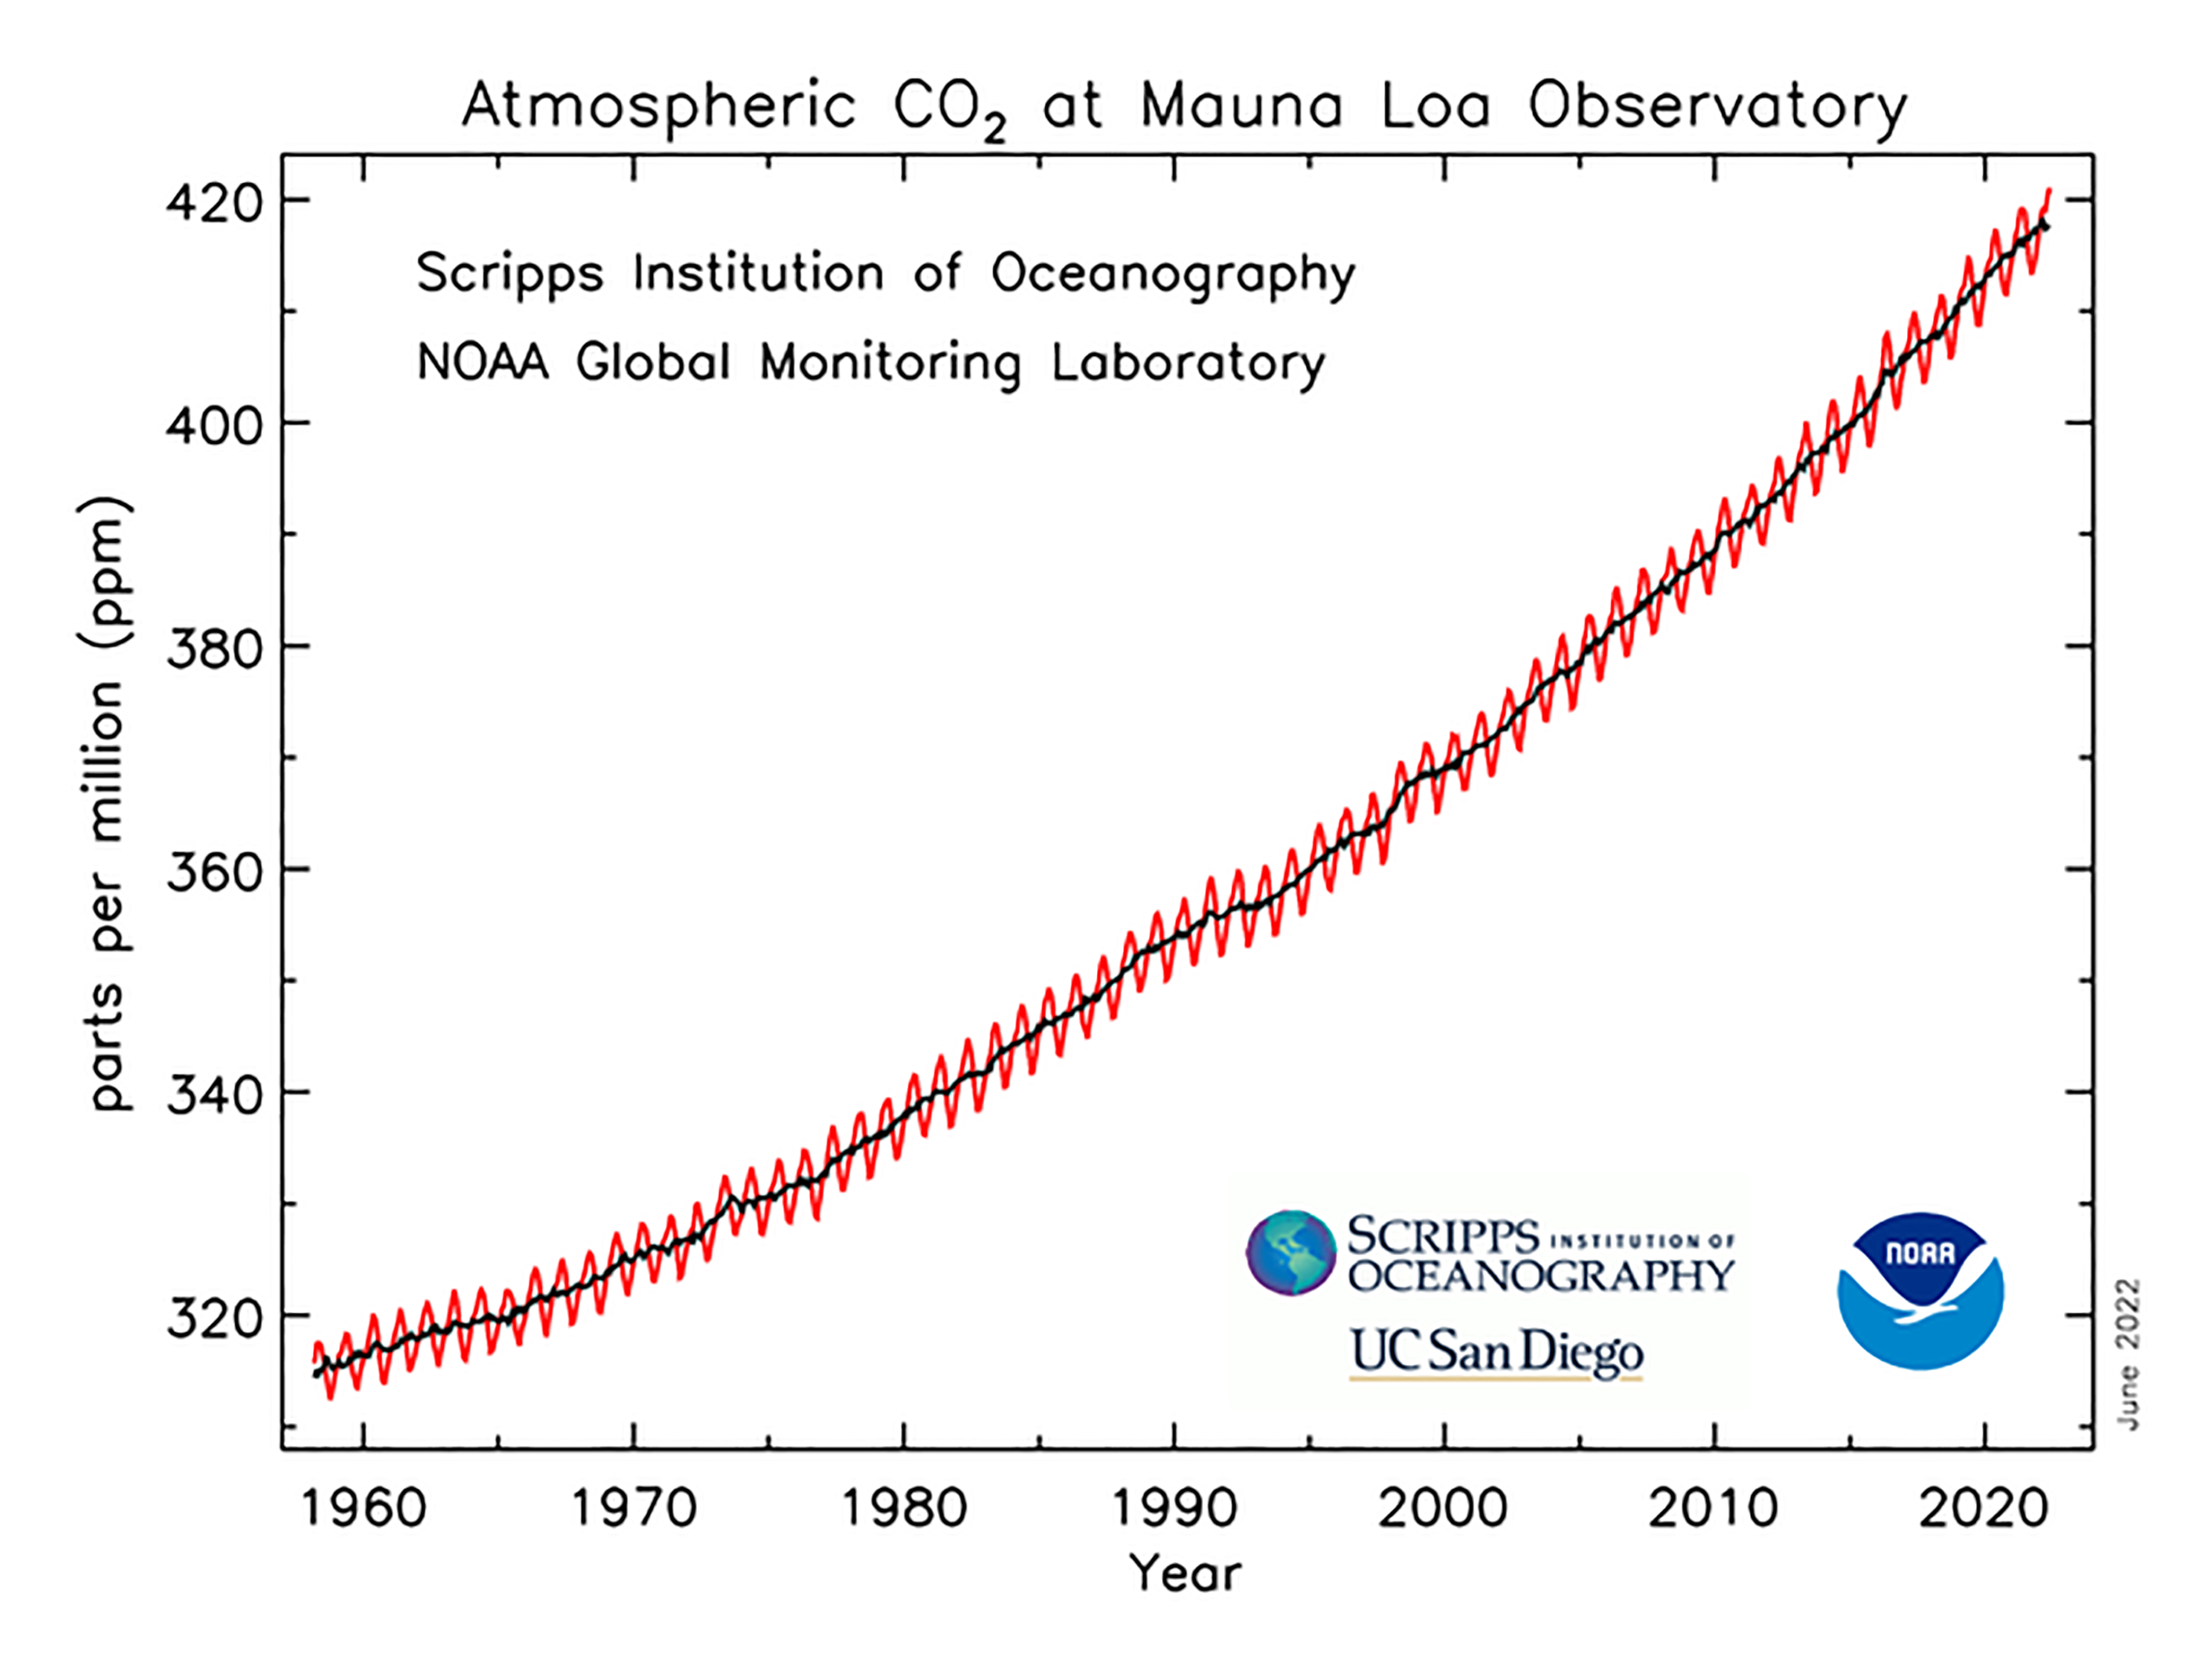 This graph shows the monthly mean carbon dioxide measured at Mauna Loa Observatory, Hawaii, the longest record of direct measurements of CO2 in the atmosphere. Monitoring was Initiated by C. David Keeling of the Scripps Institution of Oceanography in March of 1958 at a NOAA weather station. NOAA started its own independent and complementary CO2 measurements in May of 1974. 